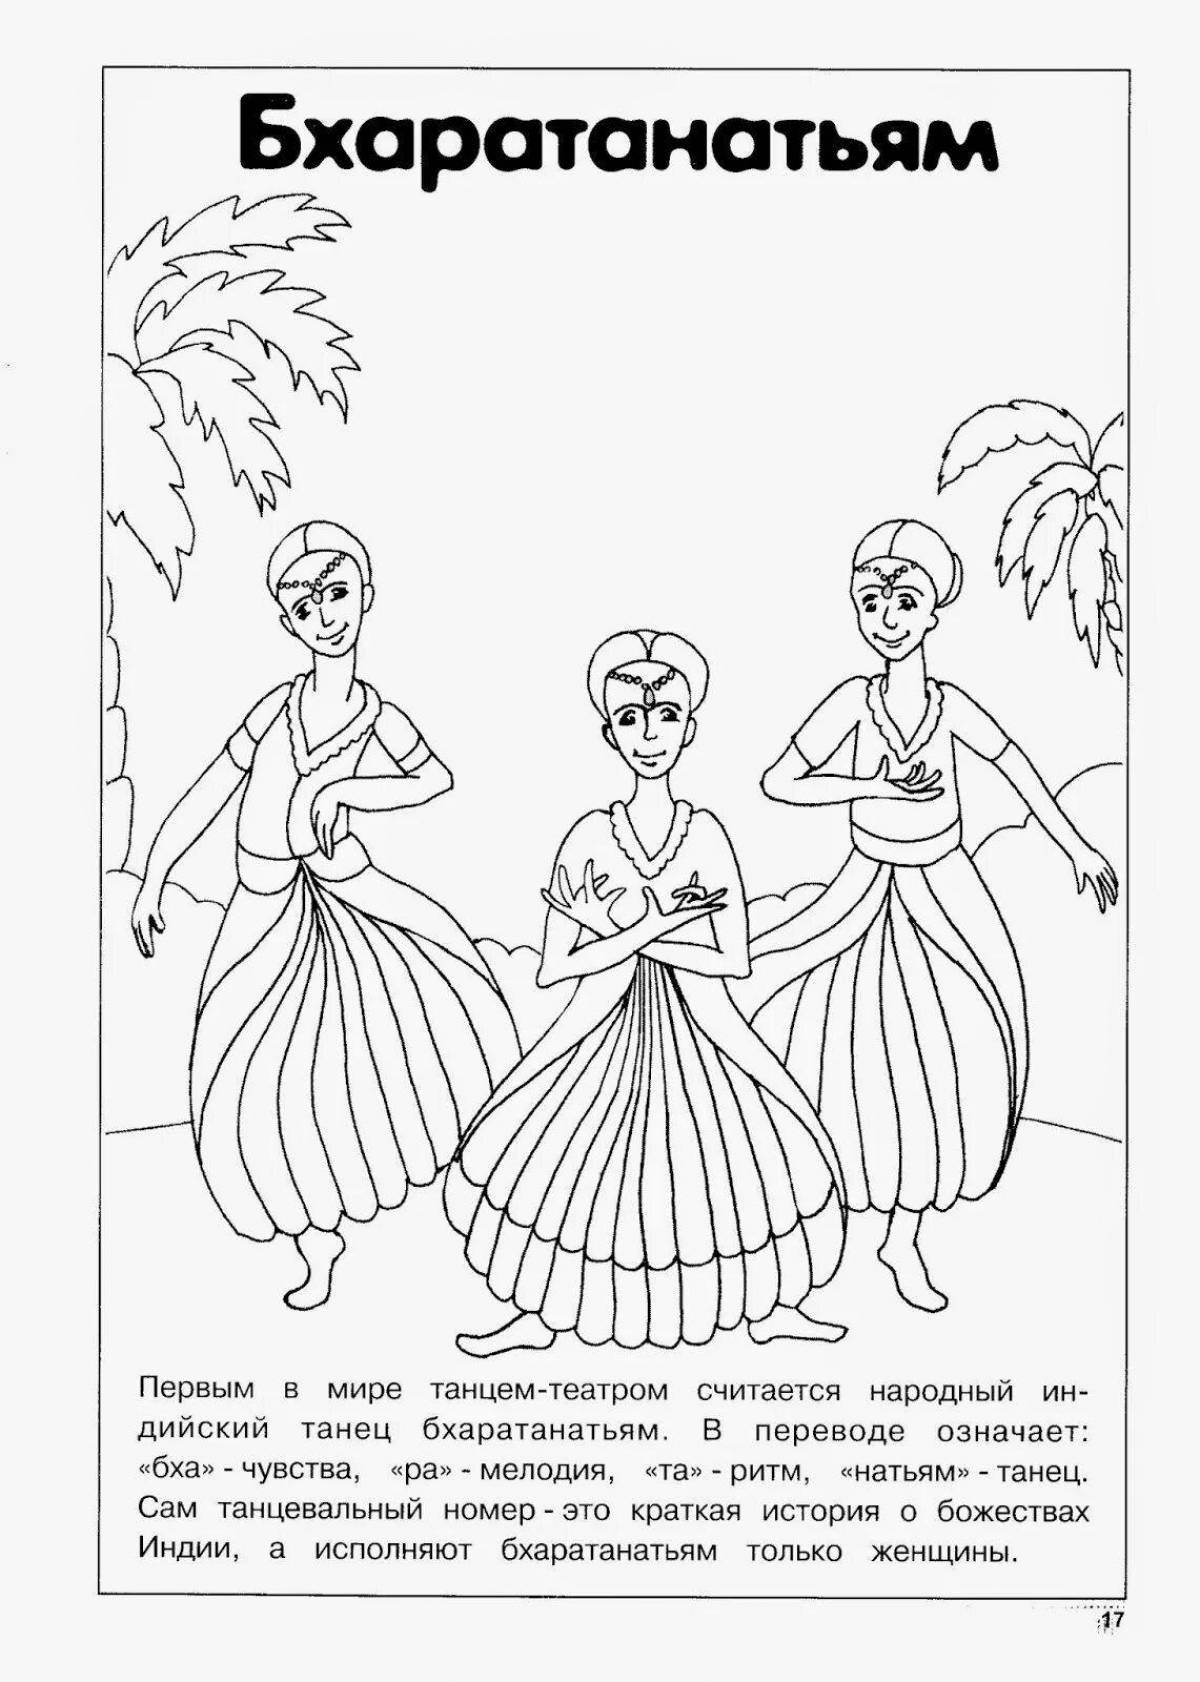 Exciting polka dance coloring book